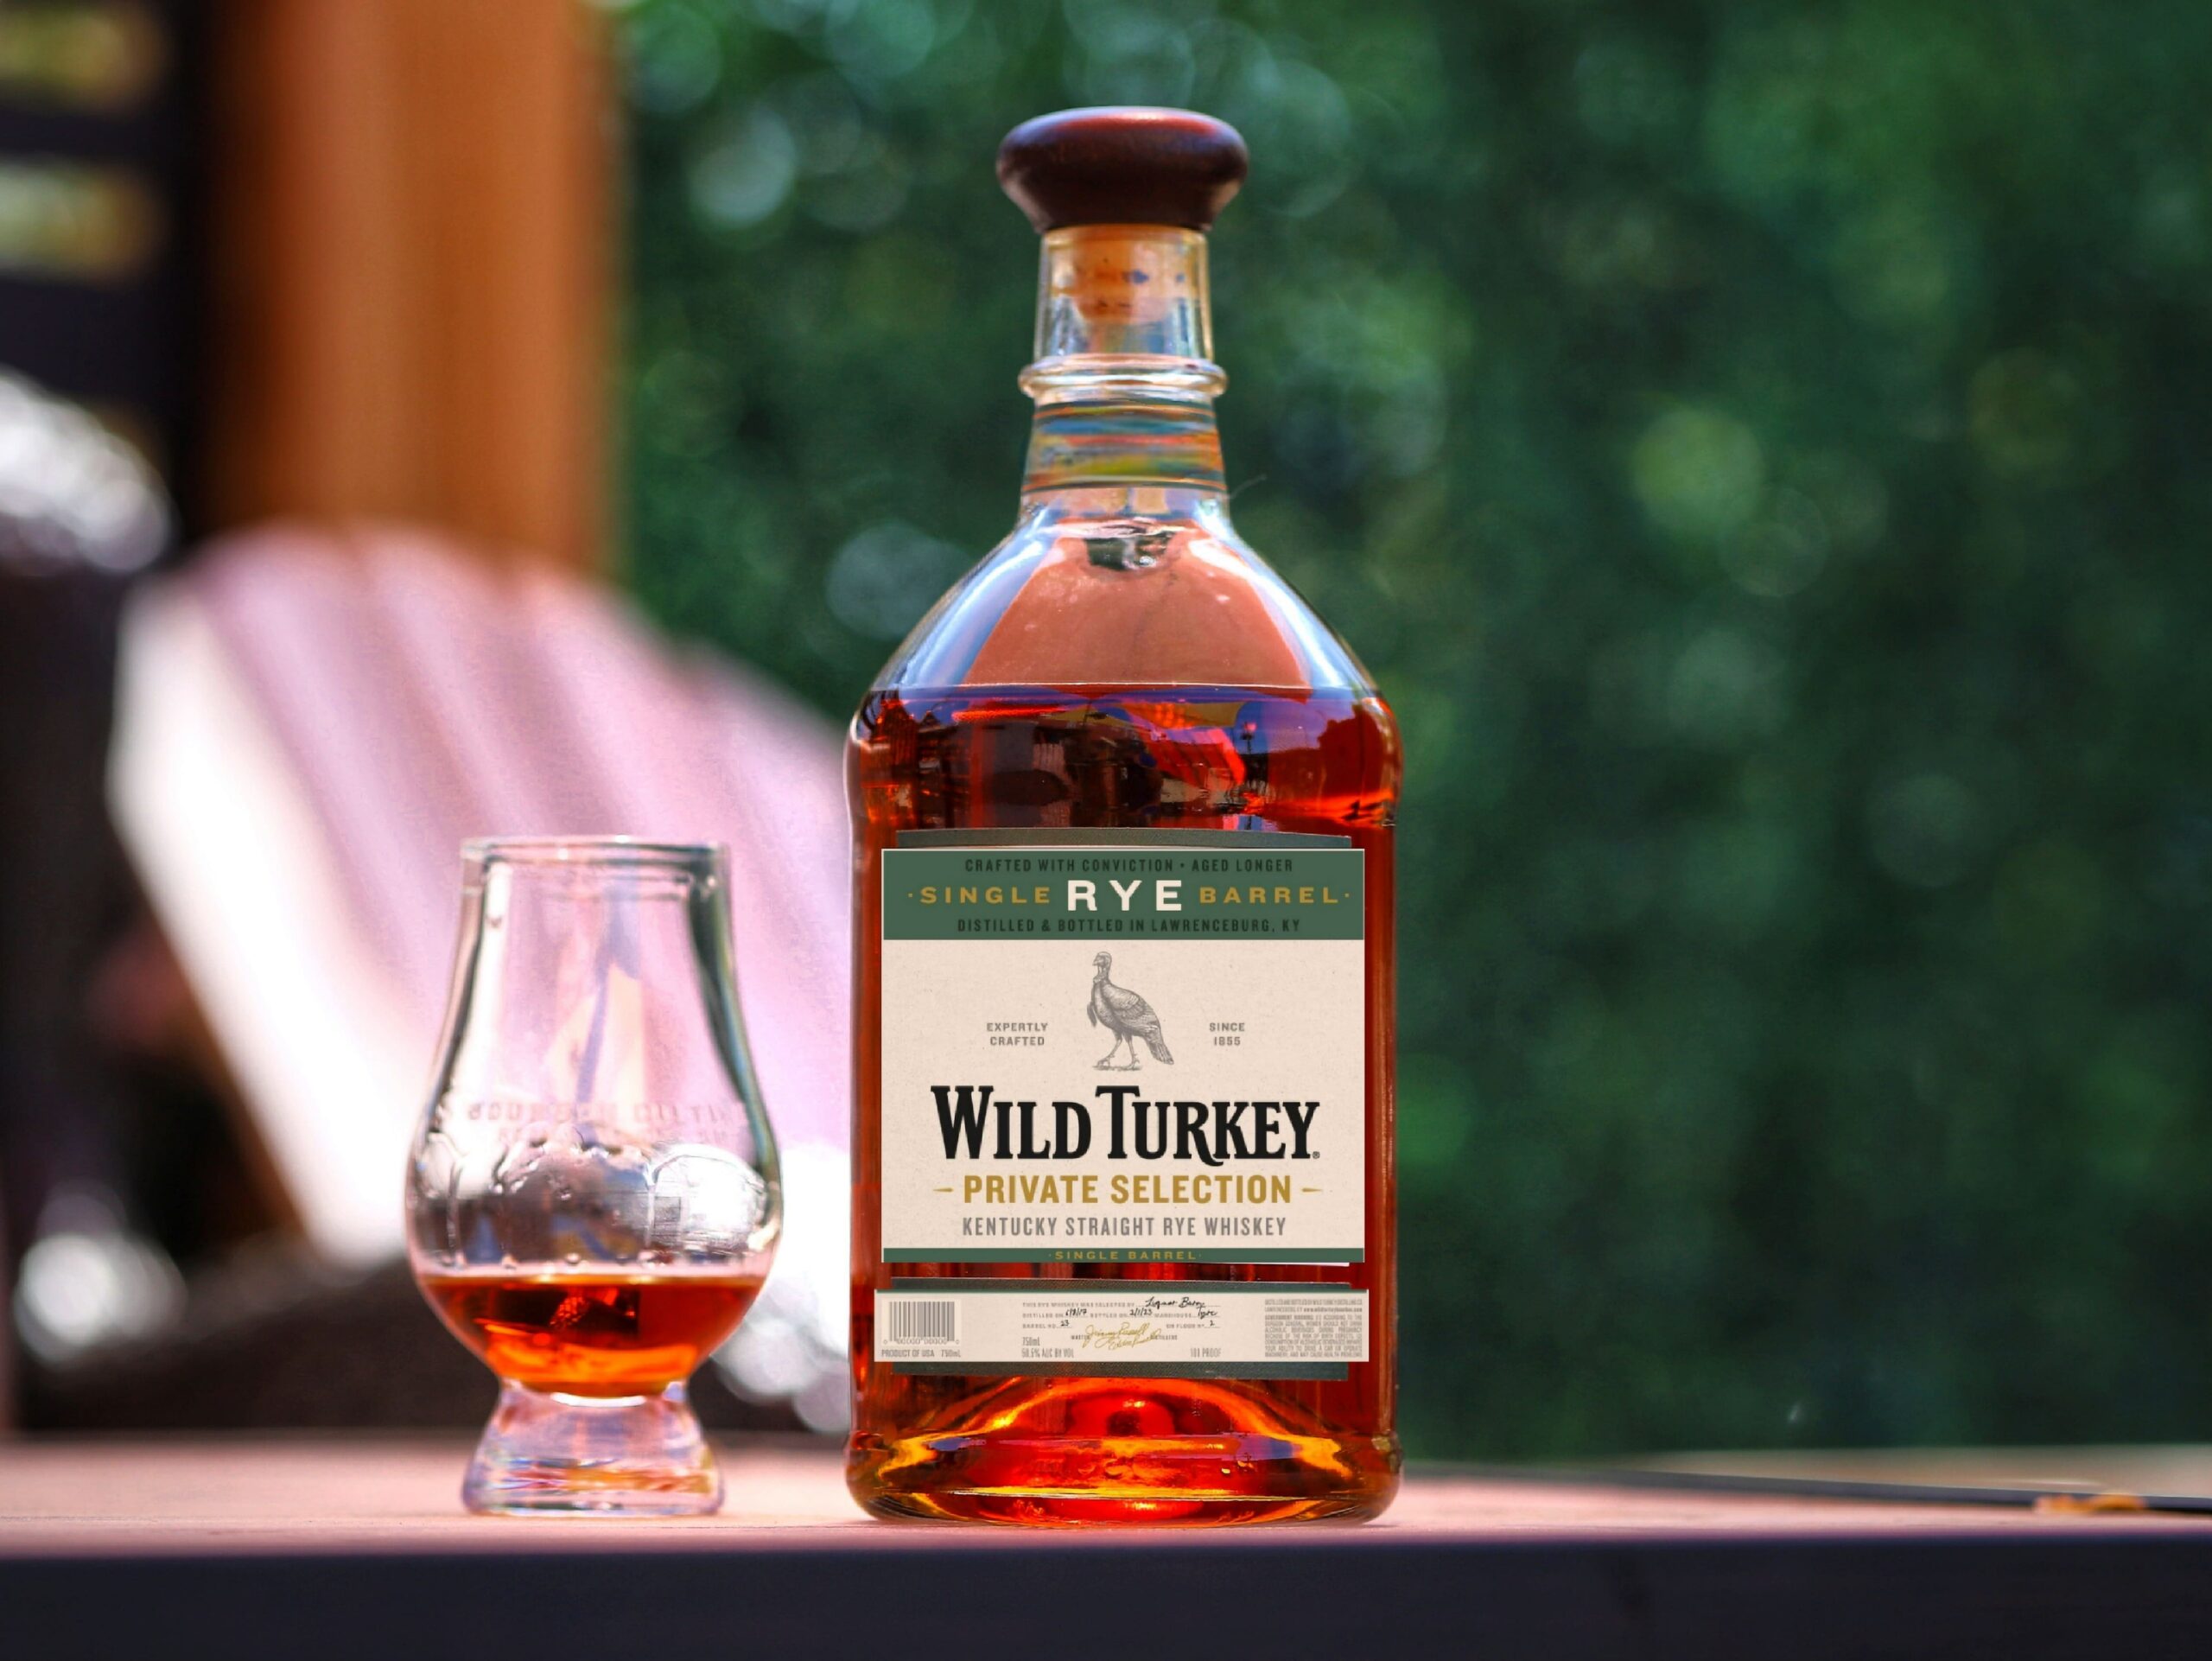 In-depth look at Wild Turkey’s decision to bring back store picks of rye whiskey